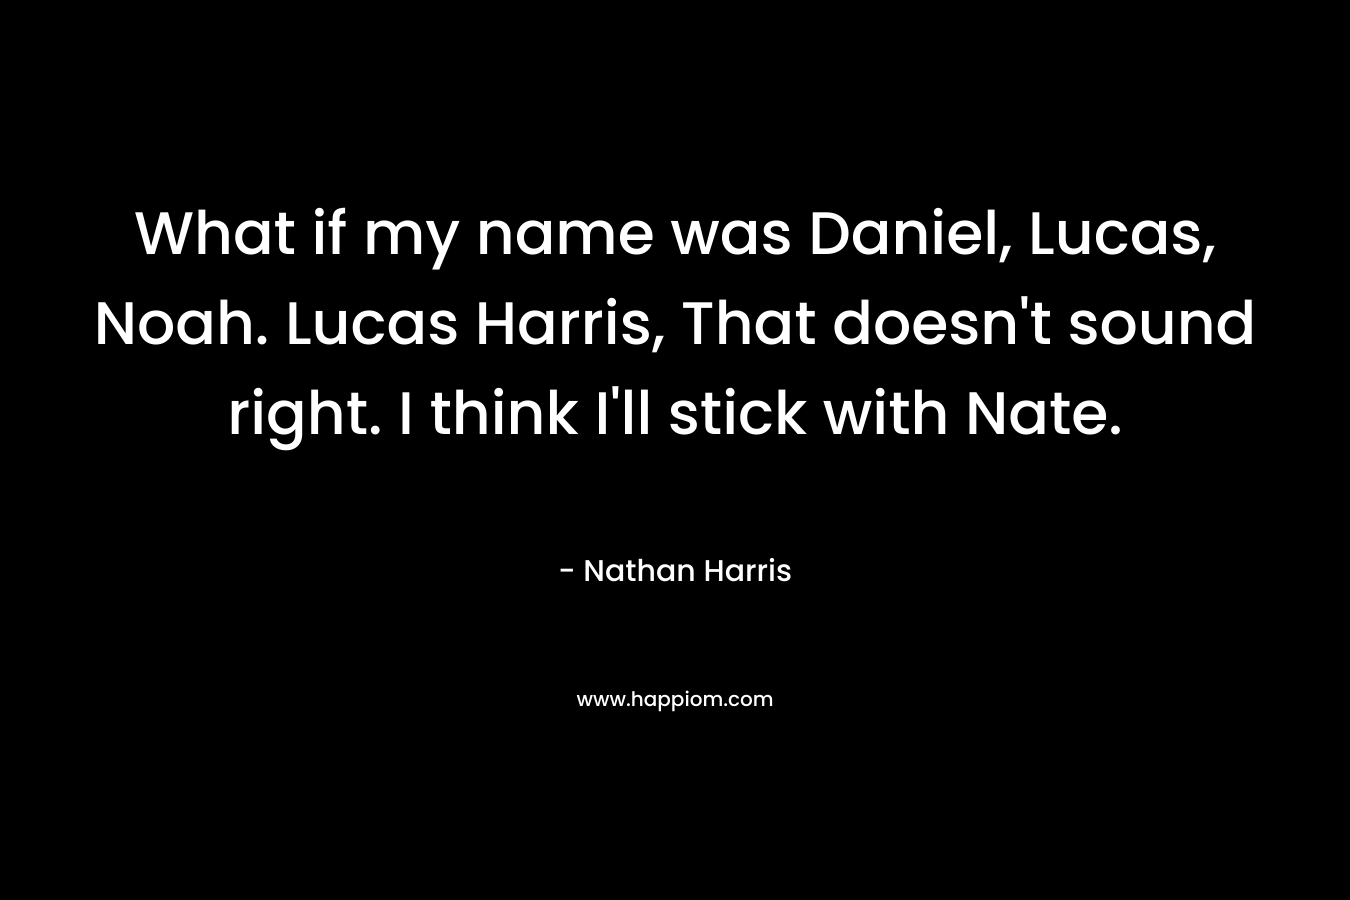 What if my name was Daniel, Lucas, Noah. Lucas Harris, That doesn’t sound right. I think I’ll stick with Nate. – Nathan Harris